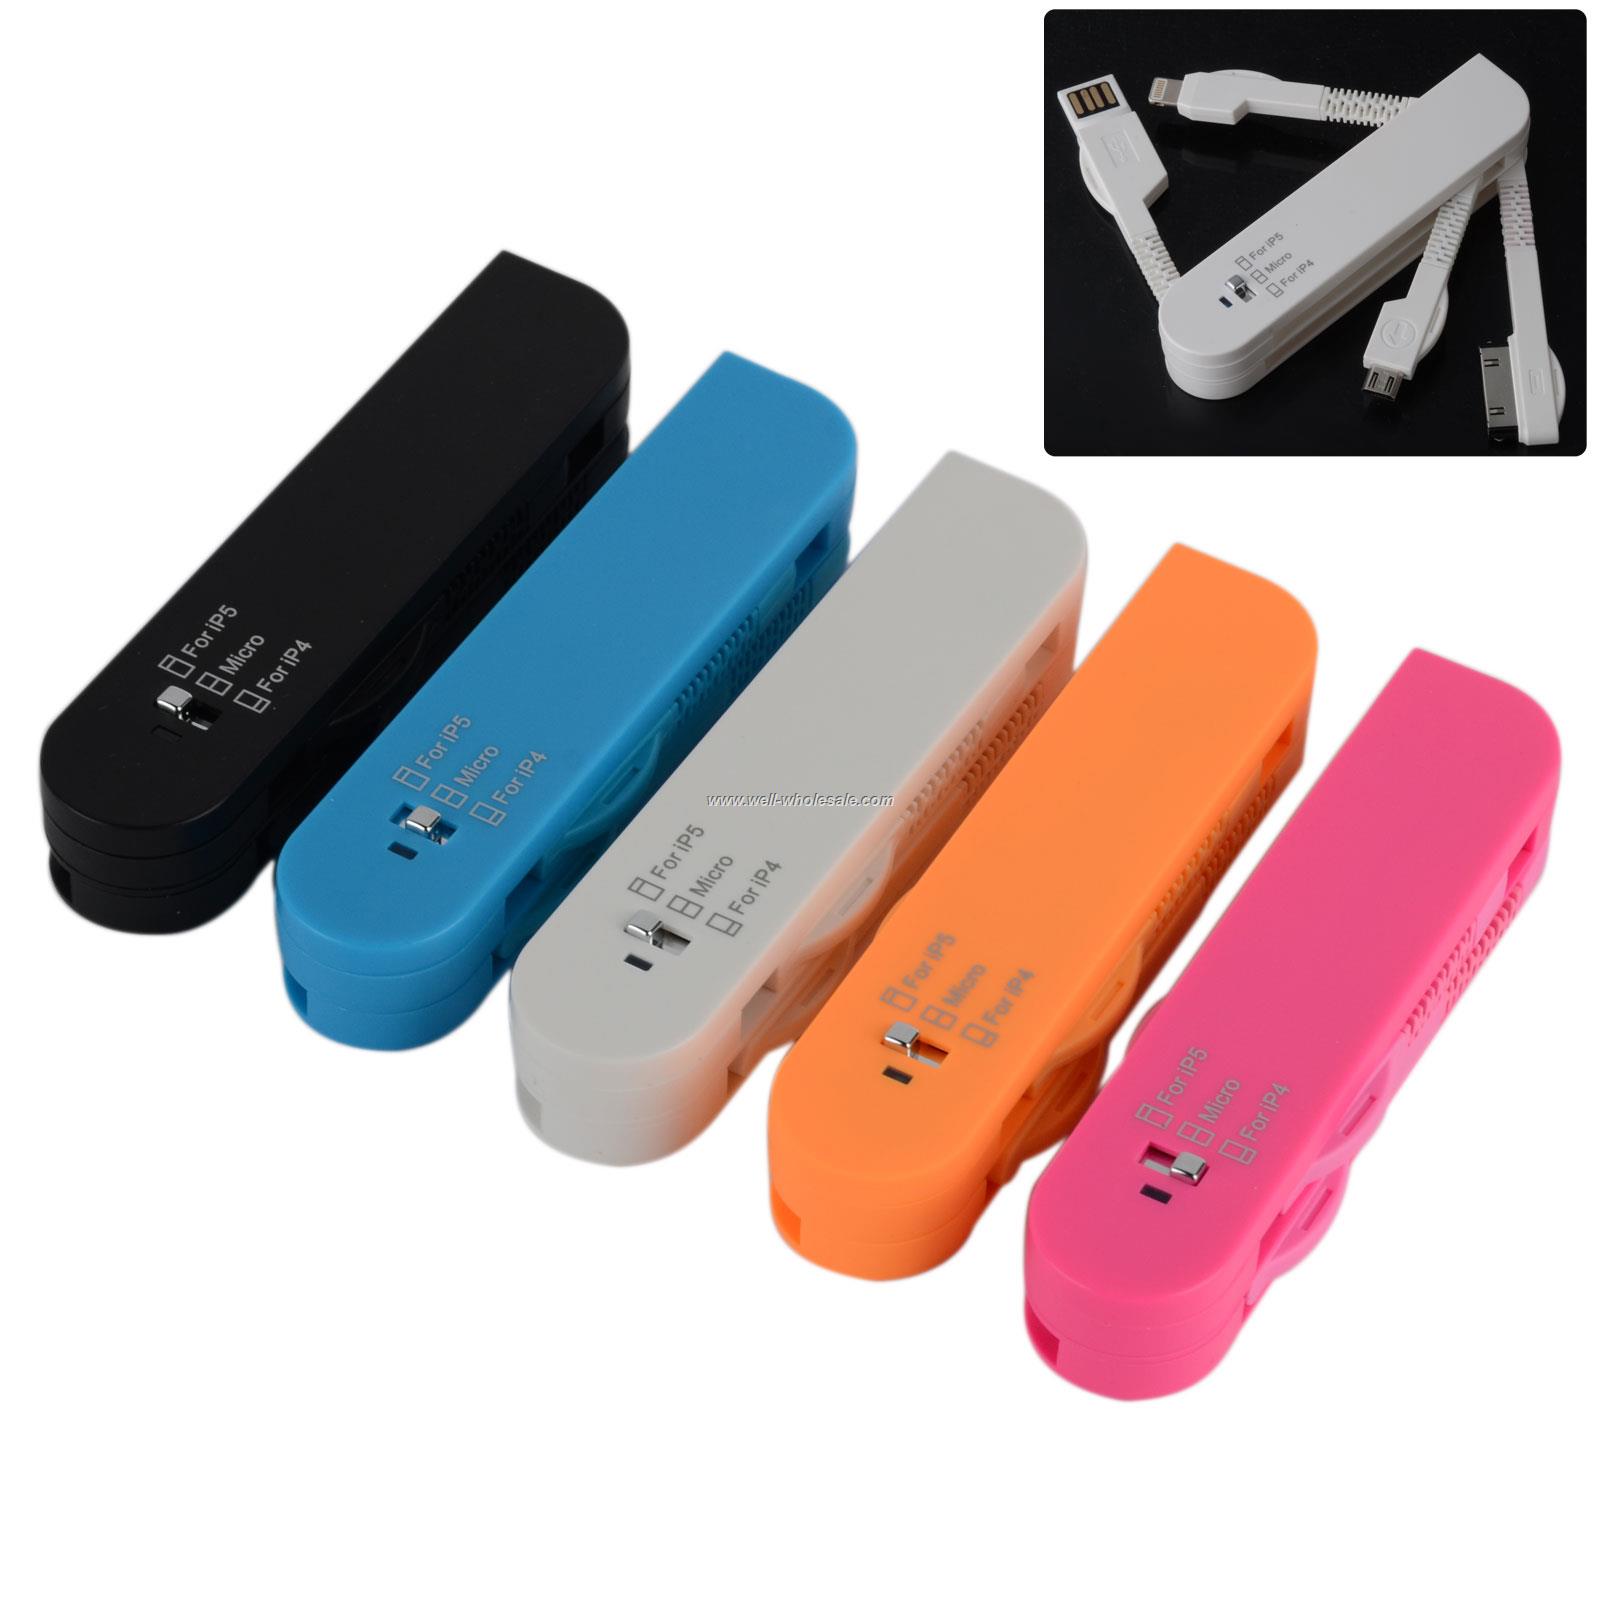 2015 New products 3 in 1 Swiss Army Data Charging Knife USB Sync Cable